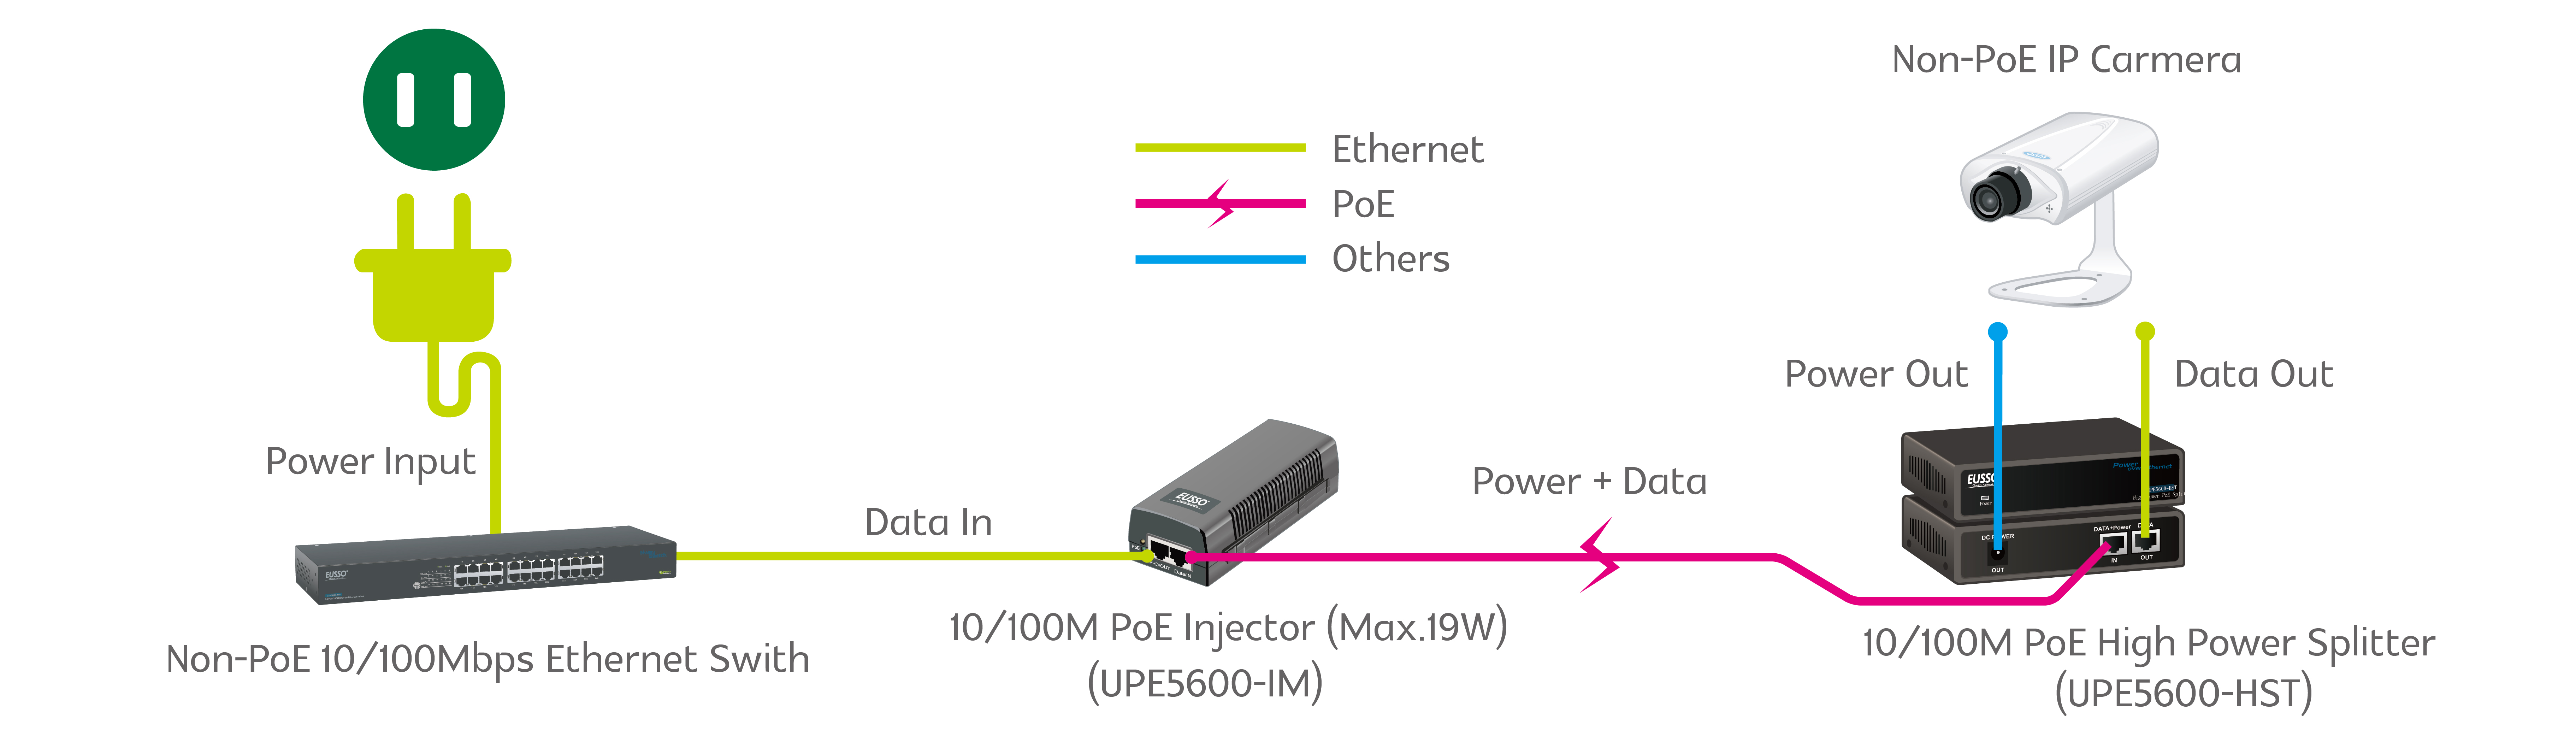 1-Port 19W High Power at/af PoE Injector  Poe Injector Wiring Diagram    EUSSO Technologies, Inc.